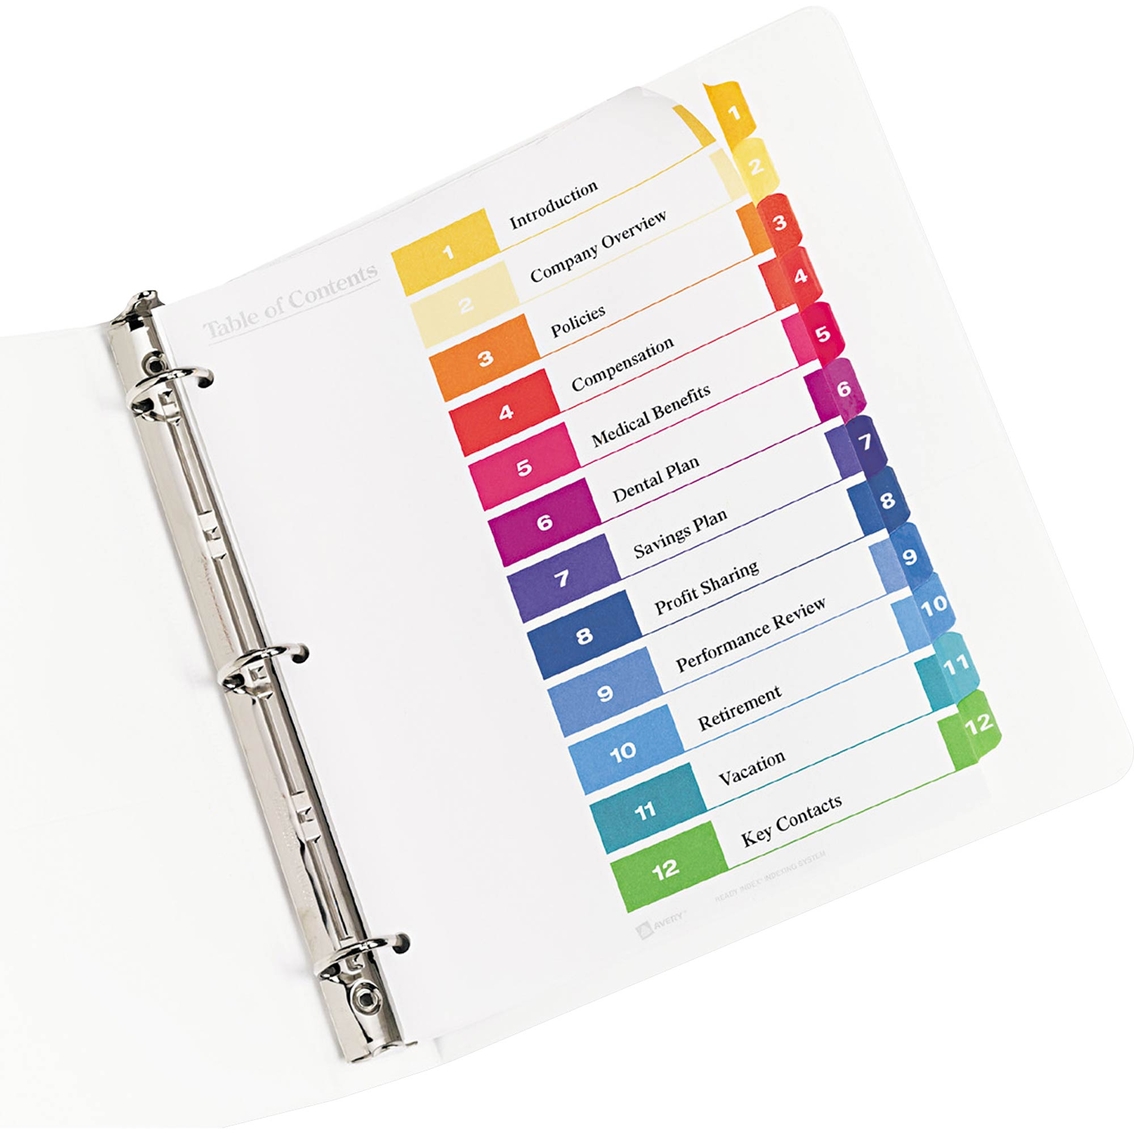 Avery Ready Index Table of Contents Dividers, 12-Tab Set - Image 3 of 3